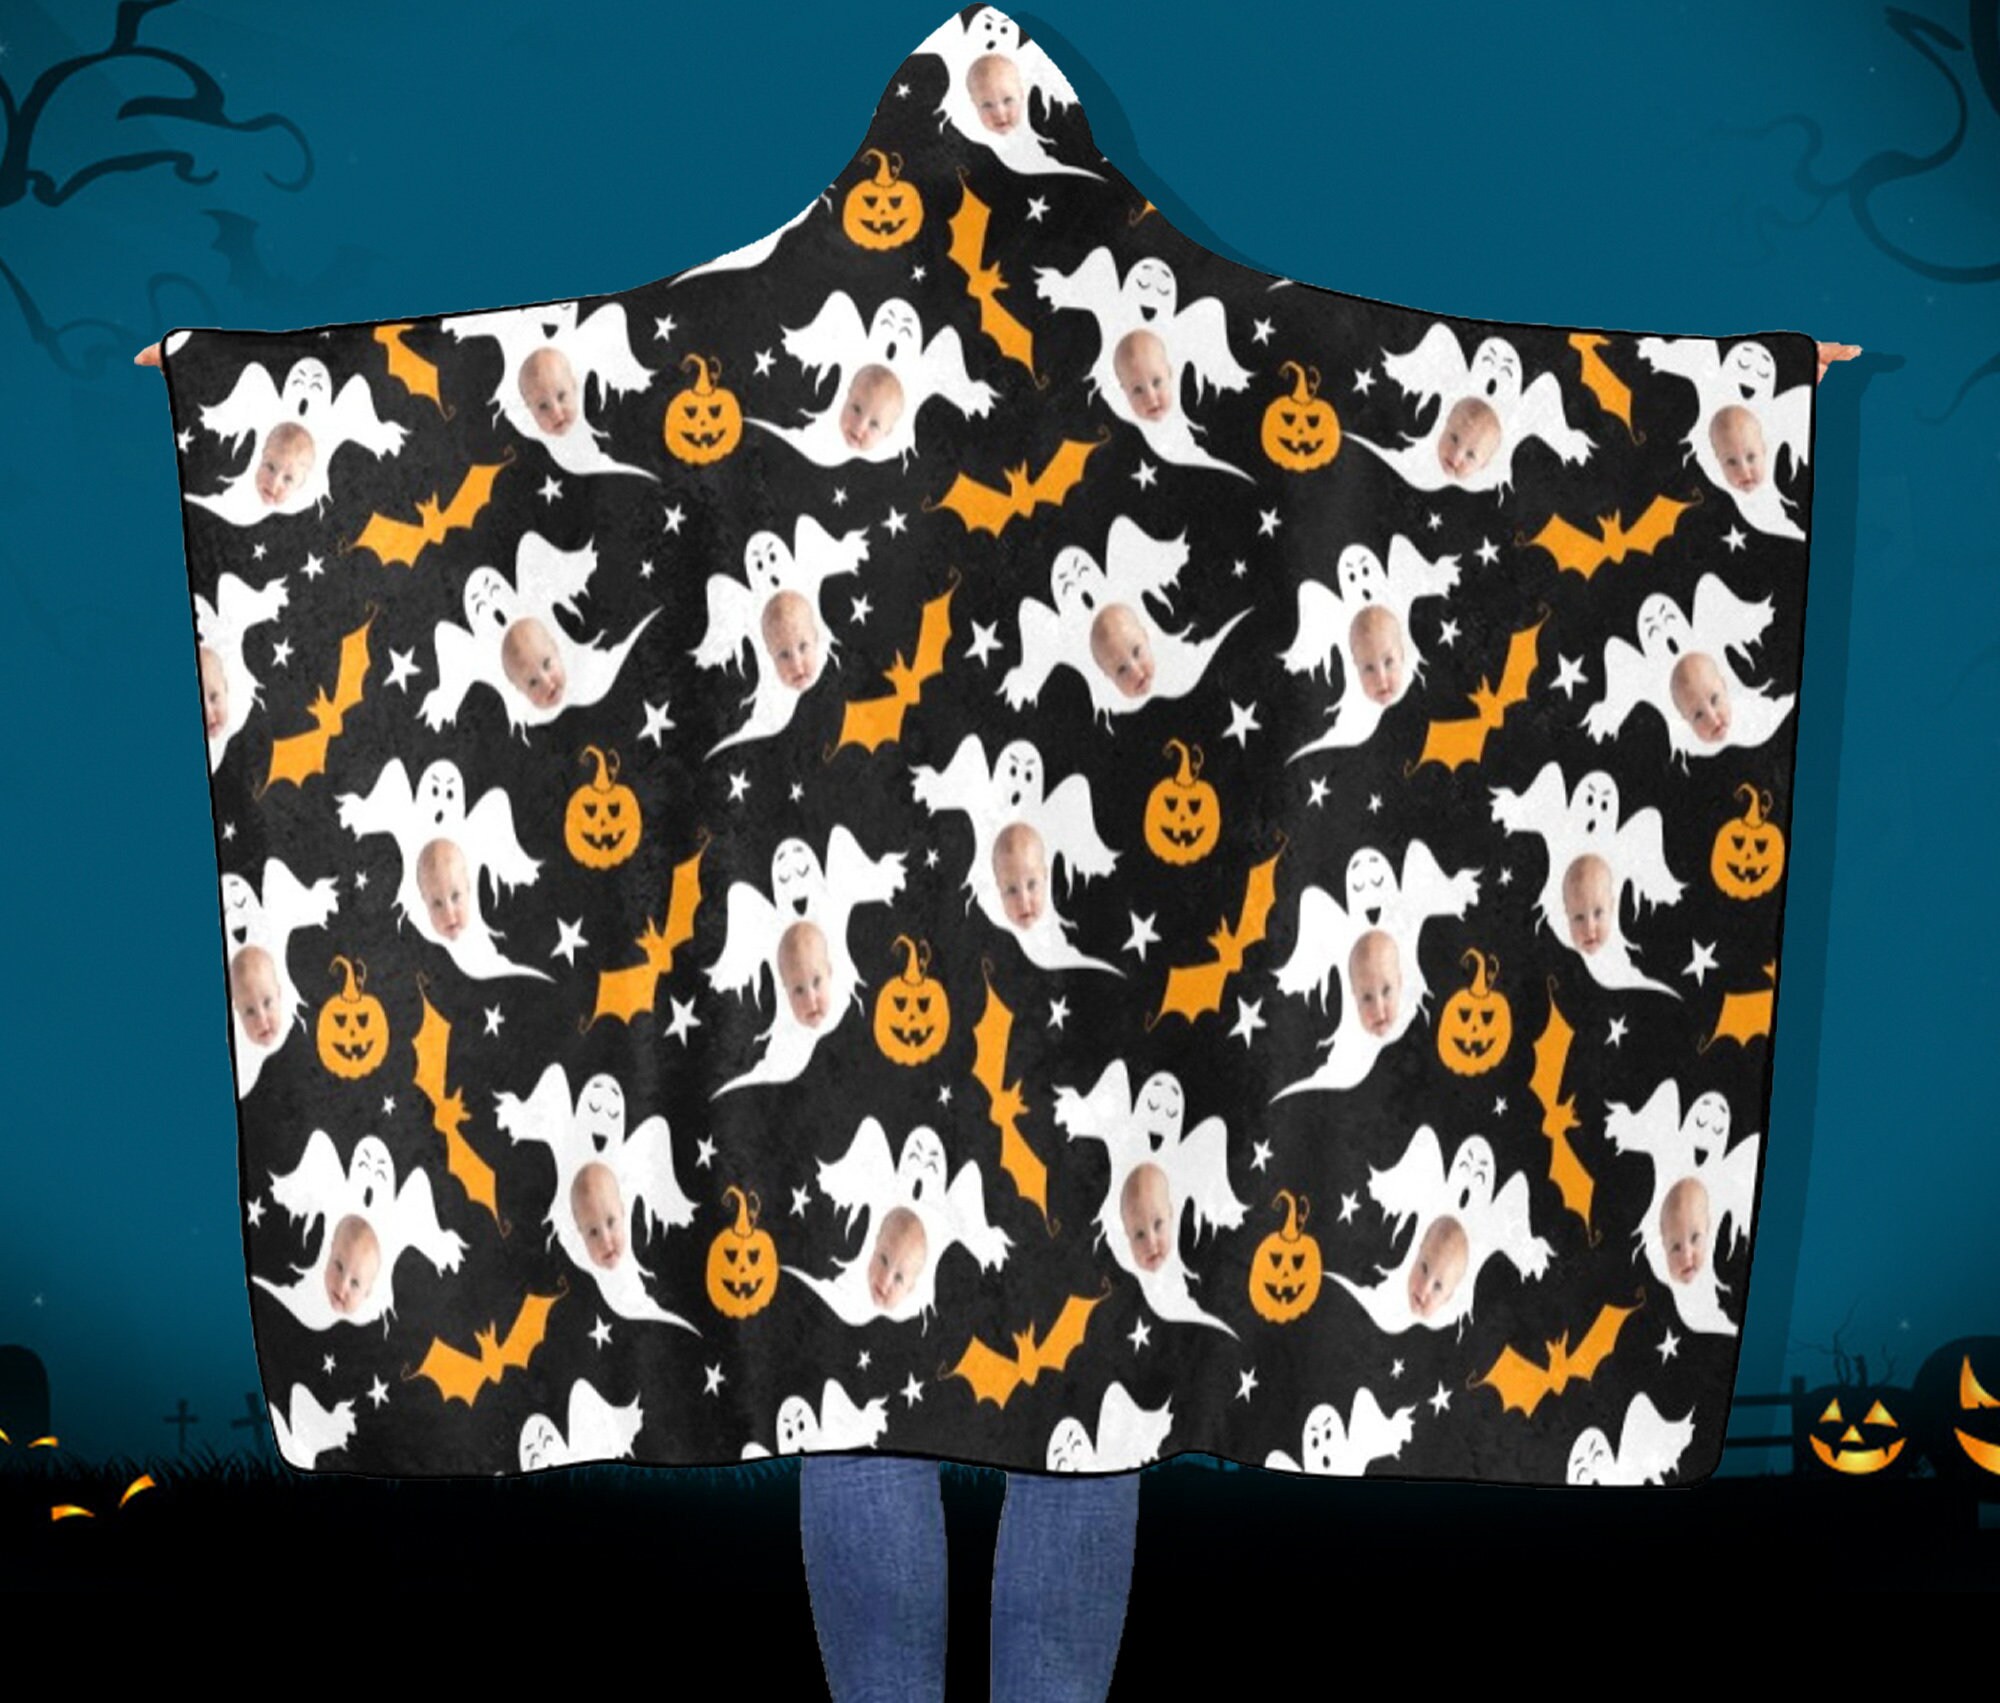 Discover Halloween Ghost Hooded Blanket,Custom Face Throw with Spider Web,Halloween Kids' Gifts, Blanket Hoodie for Men/Women/Kids Christmas Gift